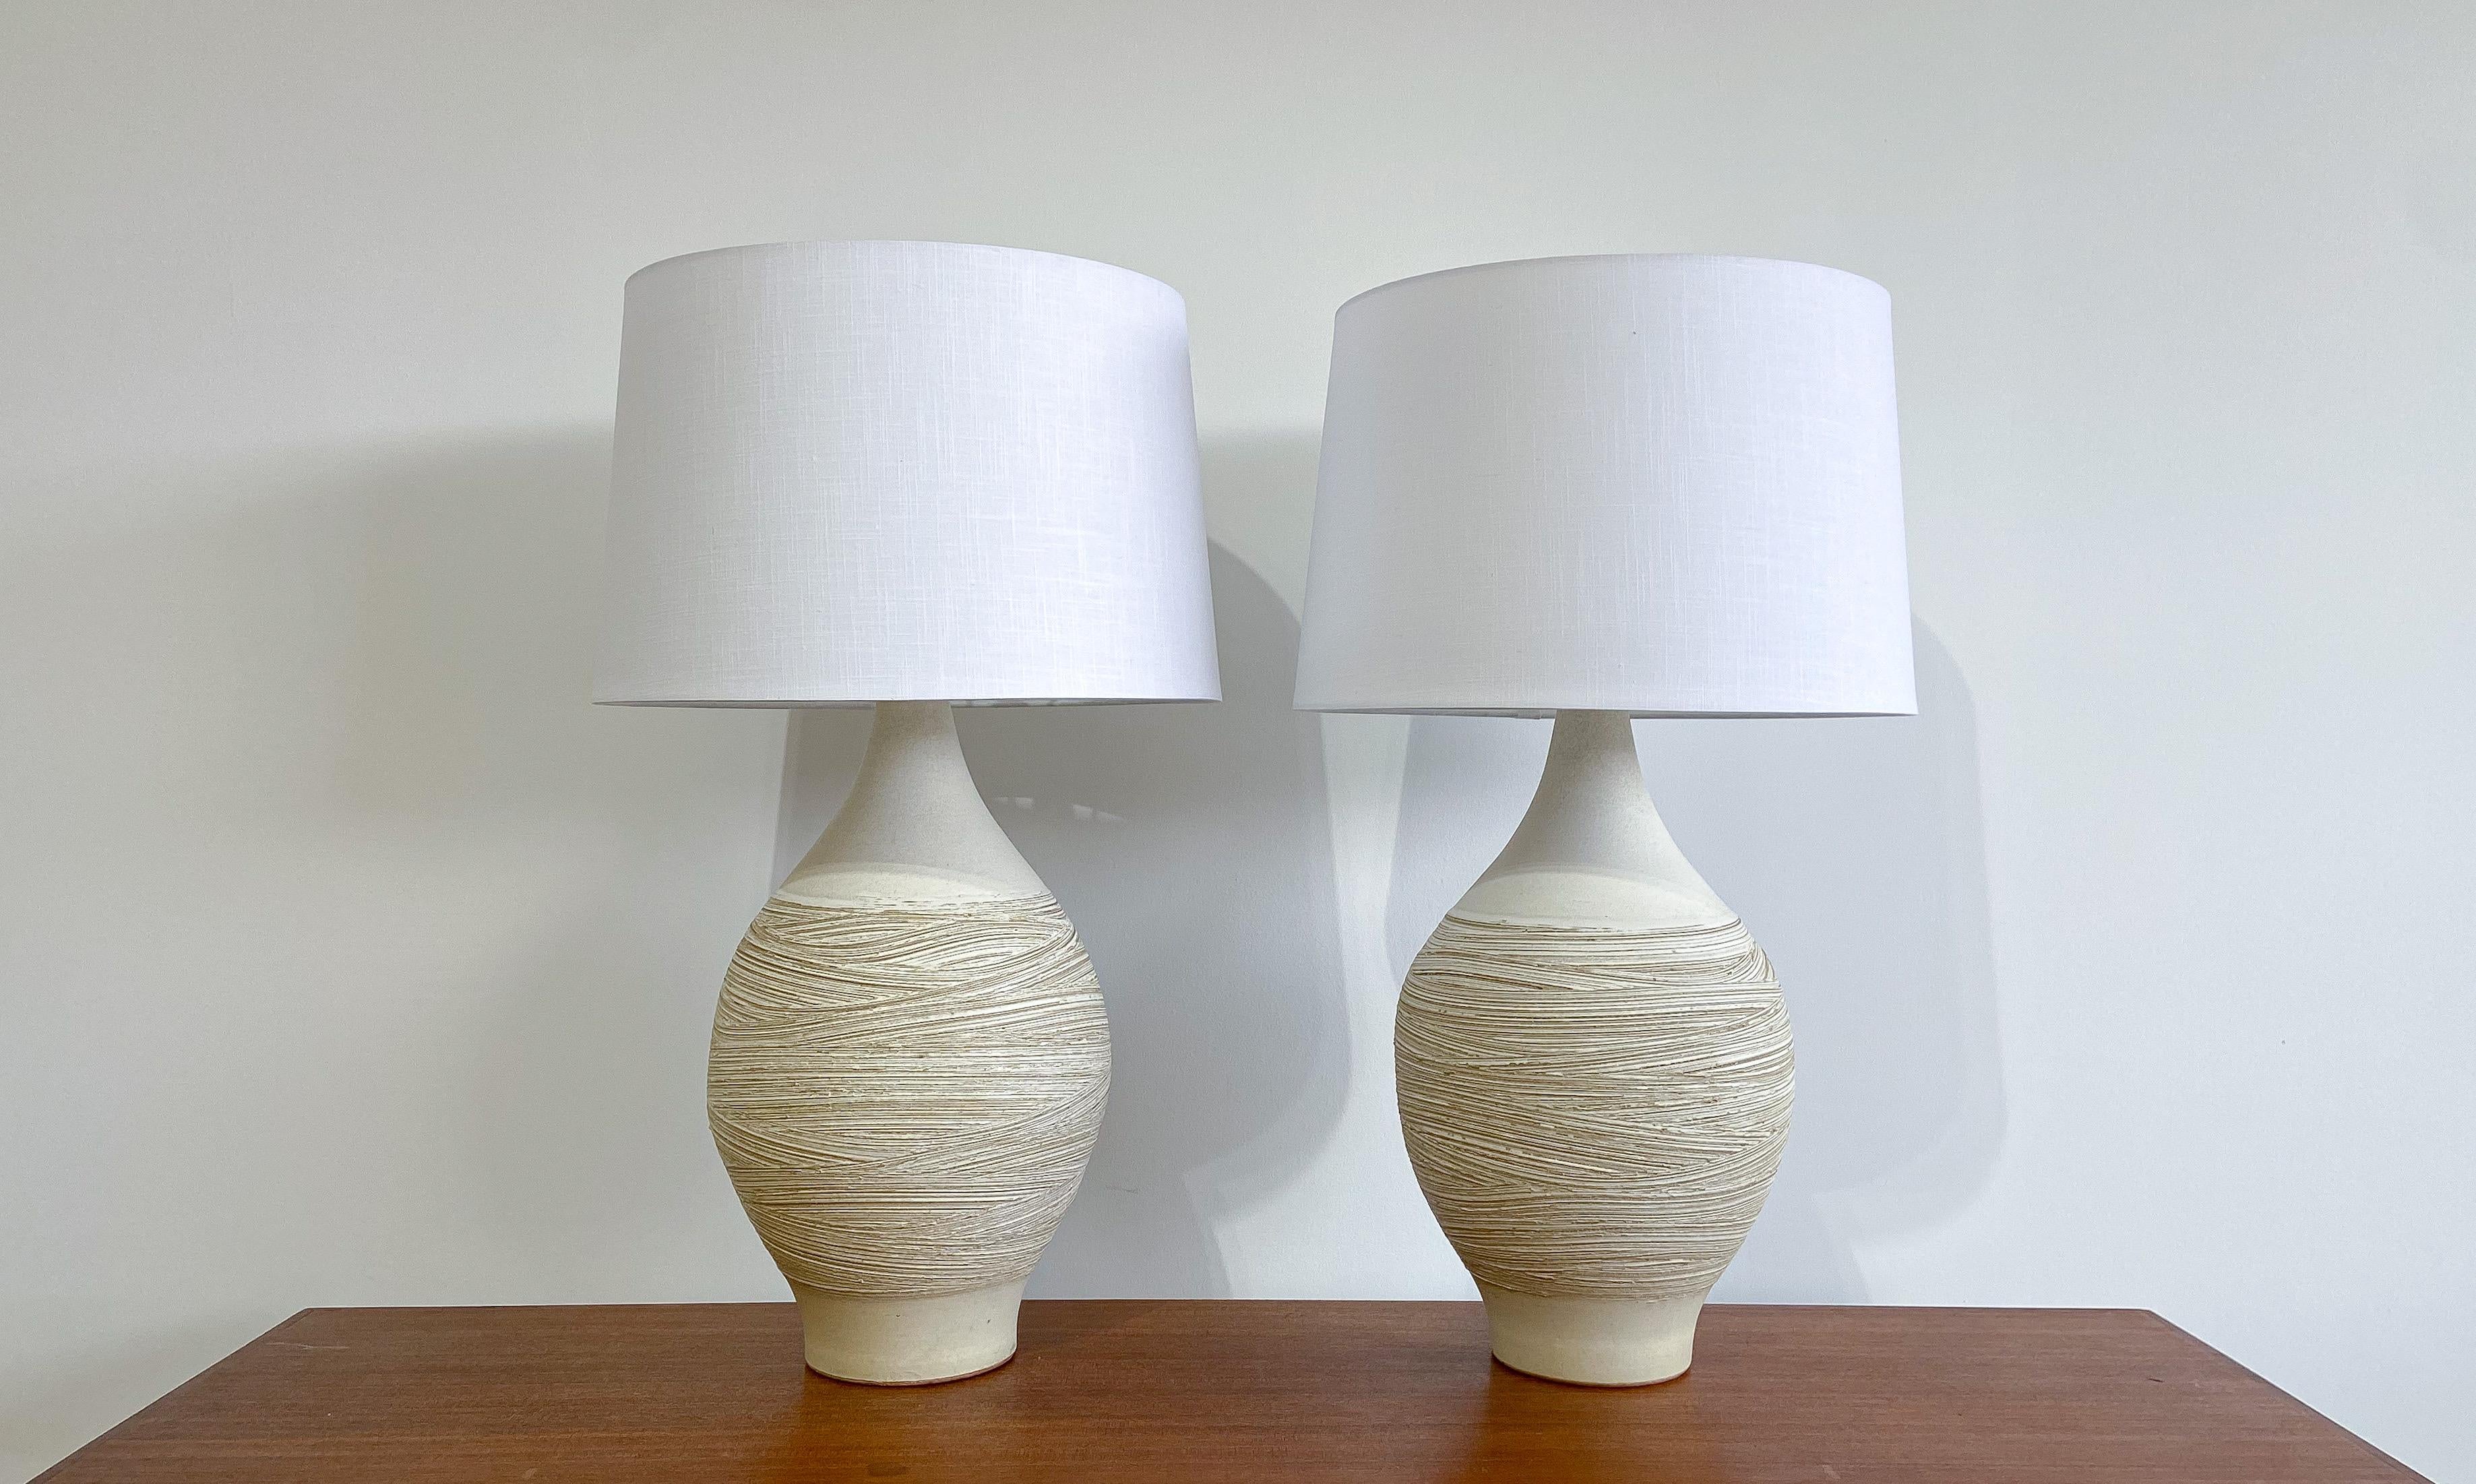 Offered is an impressive pair of ceramic table lamps designed by Lee Rosen for Design Technics.

Each featuring a Classic bottle form, with a unique hand-incised pattern for a wonderful overall aesthetic and texture. 

Both lamps appropriately